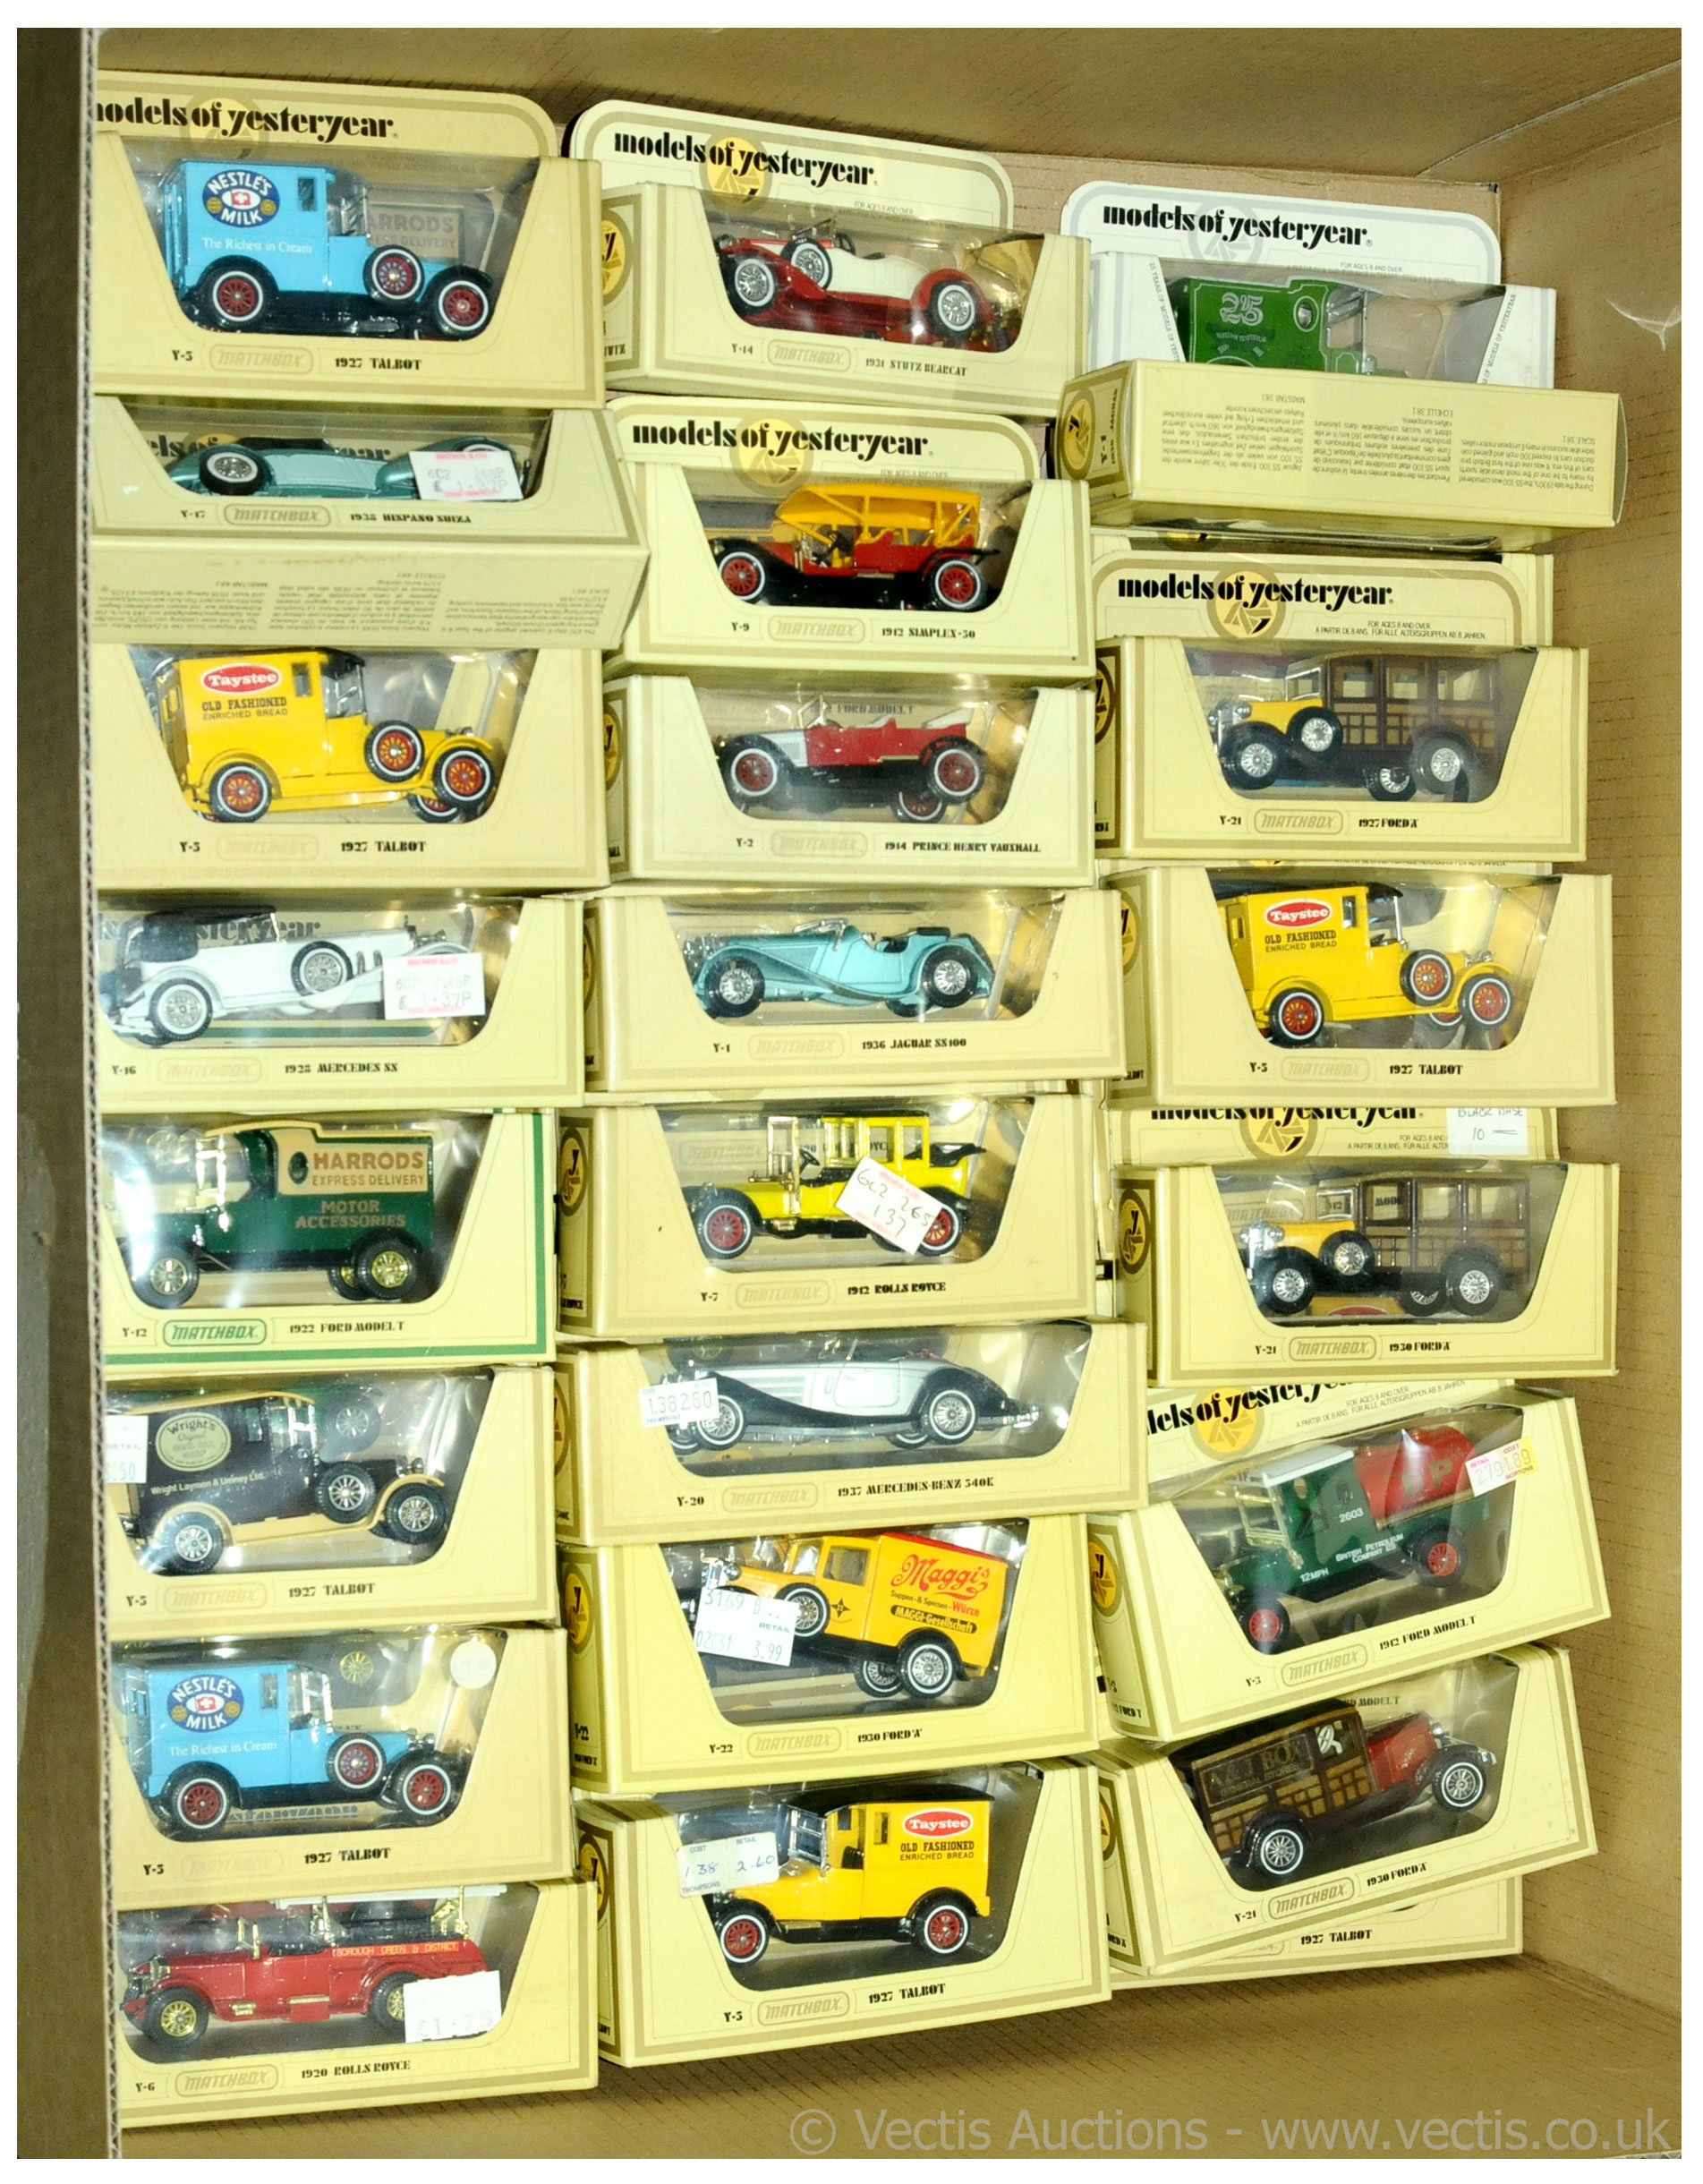 GRP inc Matchbox Models of Yesteryear in straw